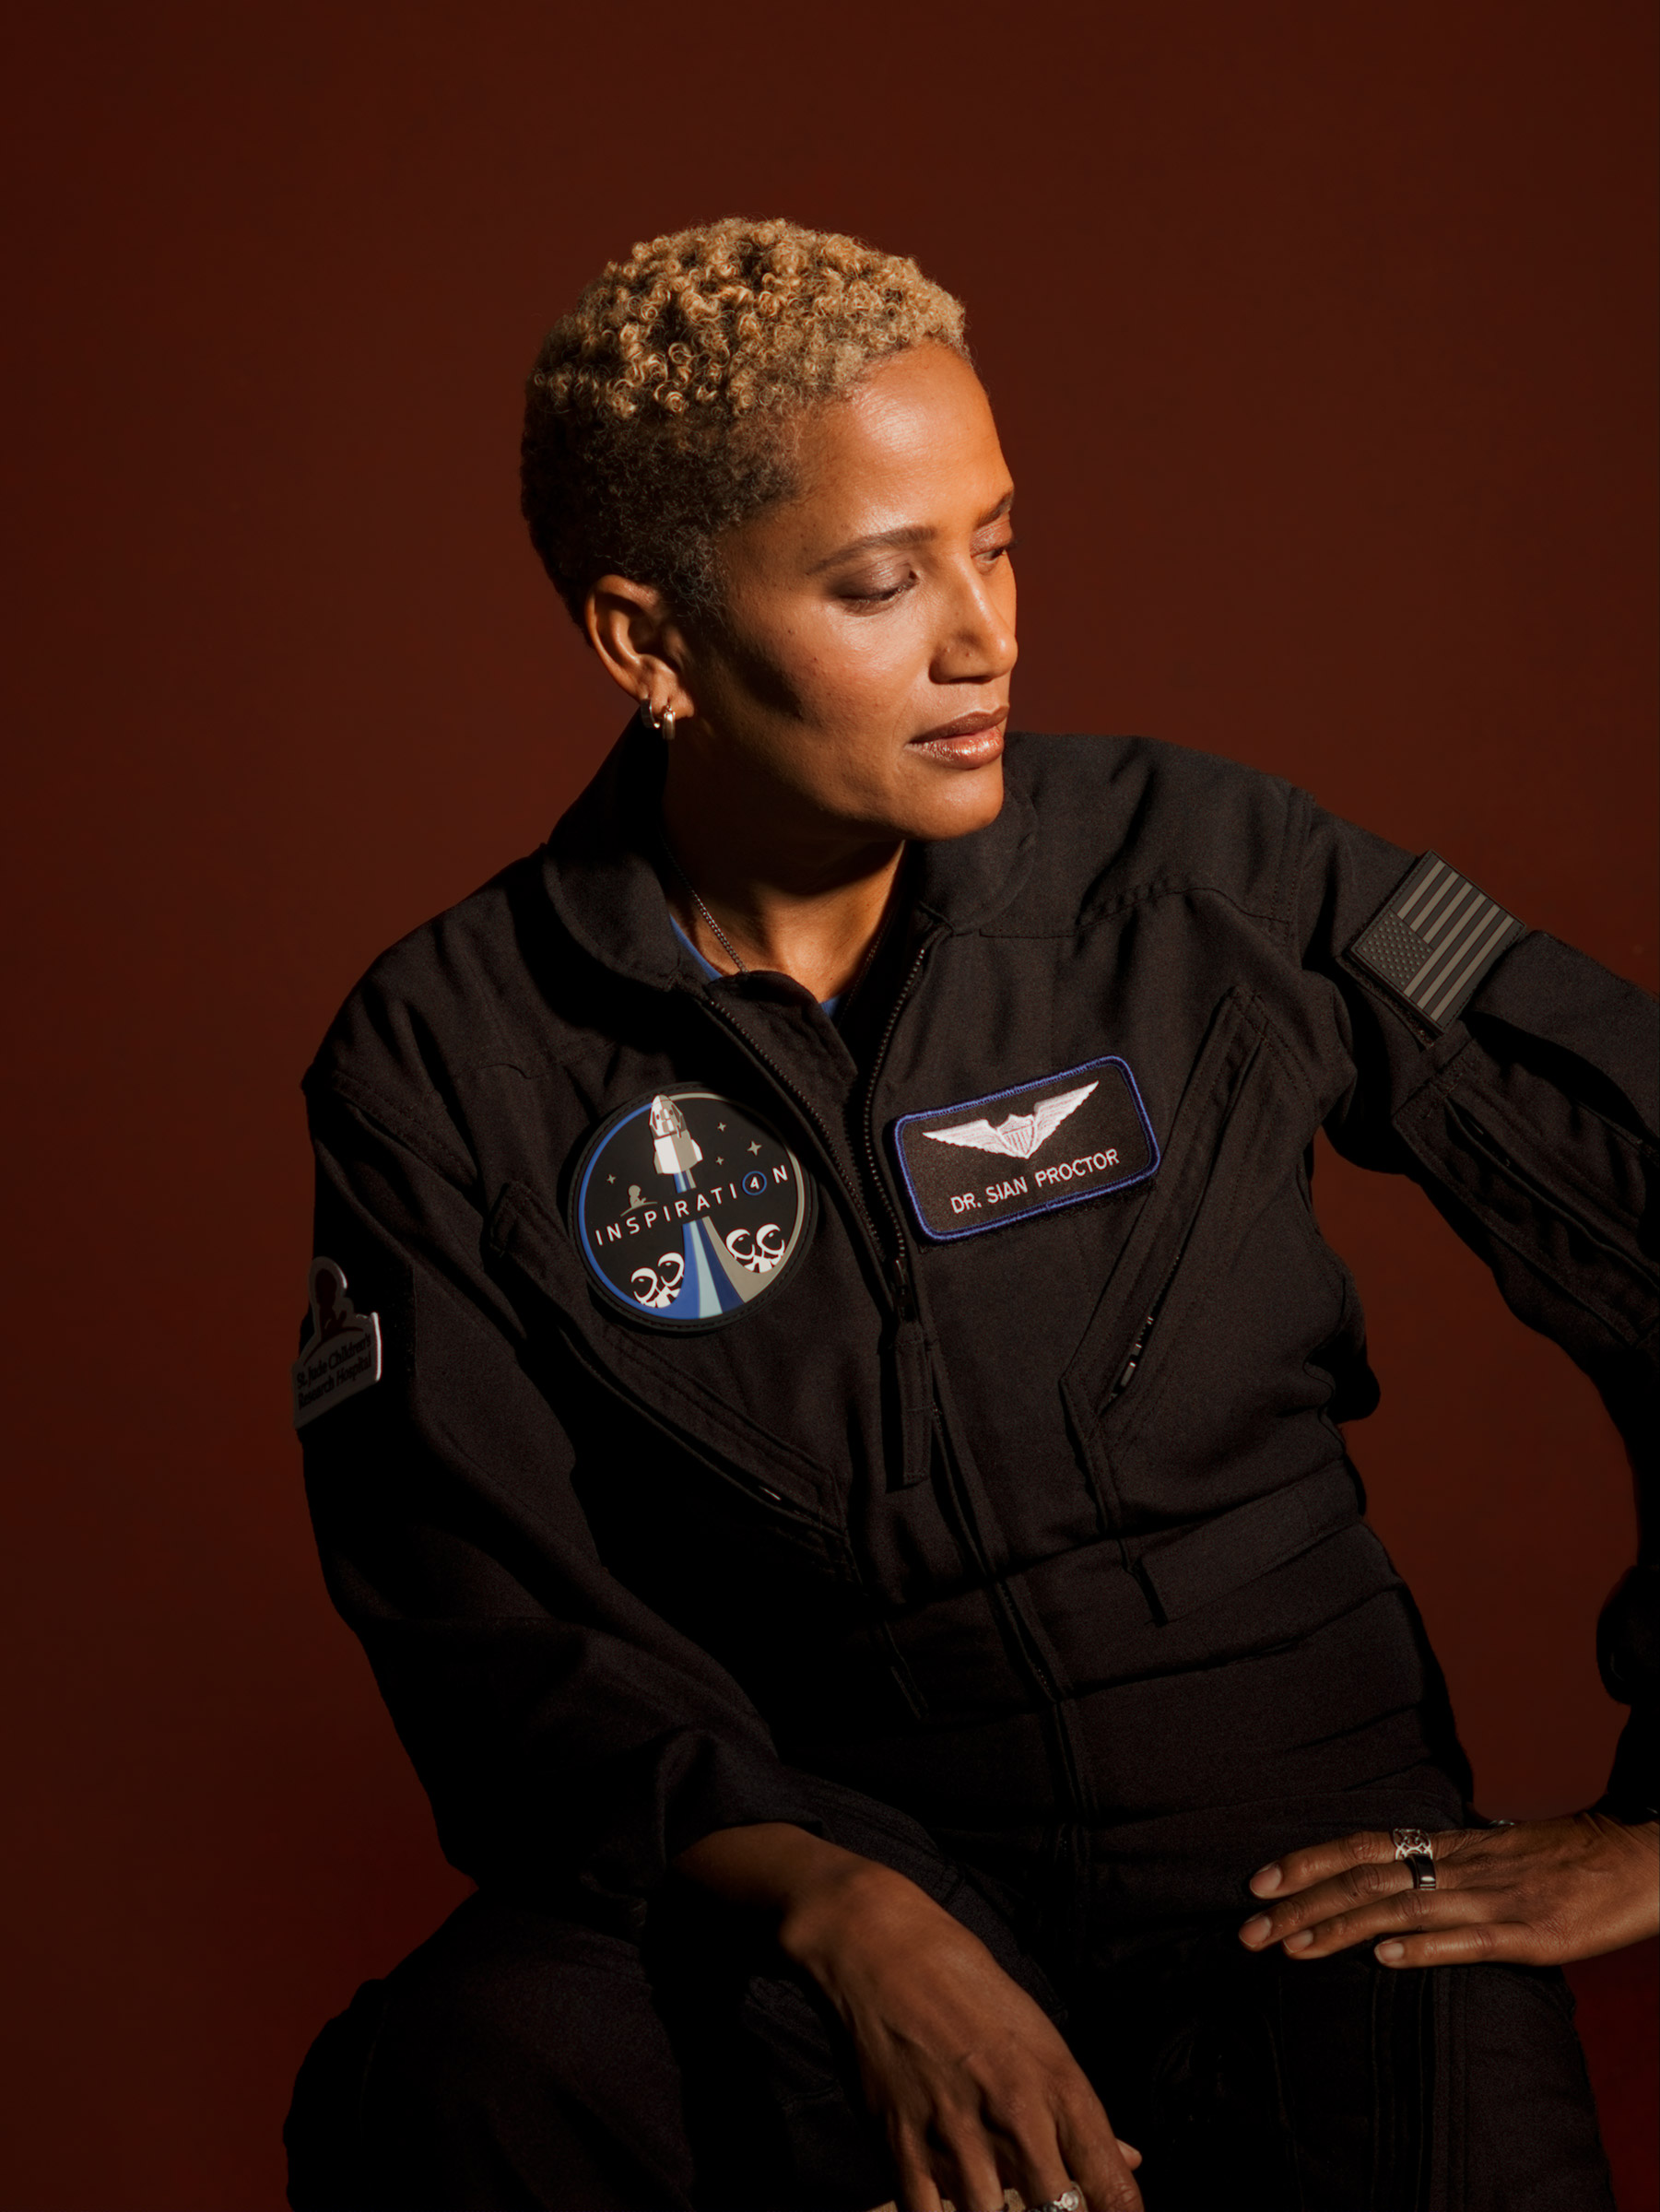 Dr. Sian Proctor of the Inspiration4 crew, the world's first all-civilian mission to orbit. (Philip Montgomery for TIME)